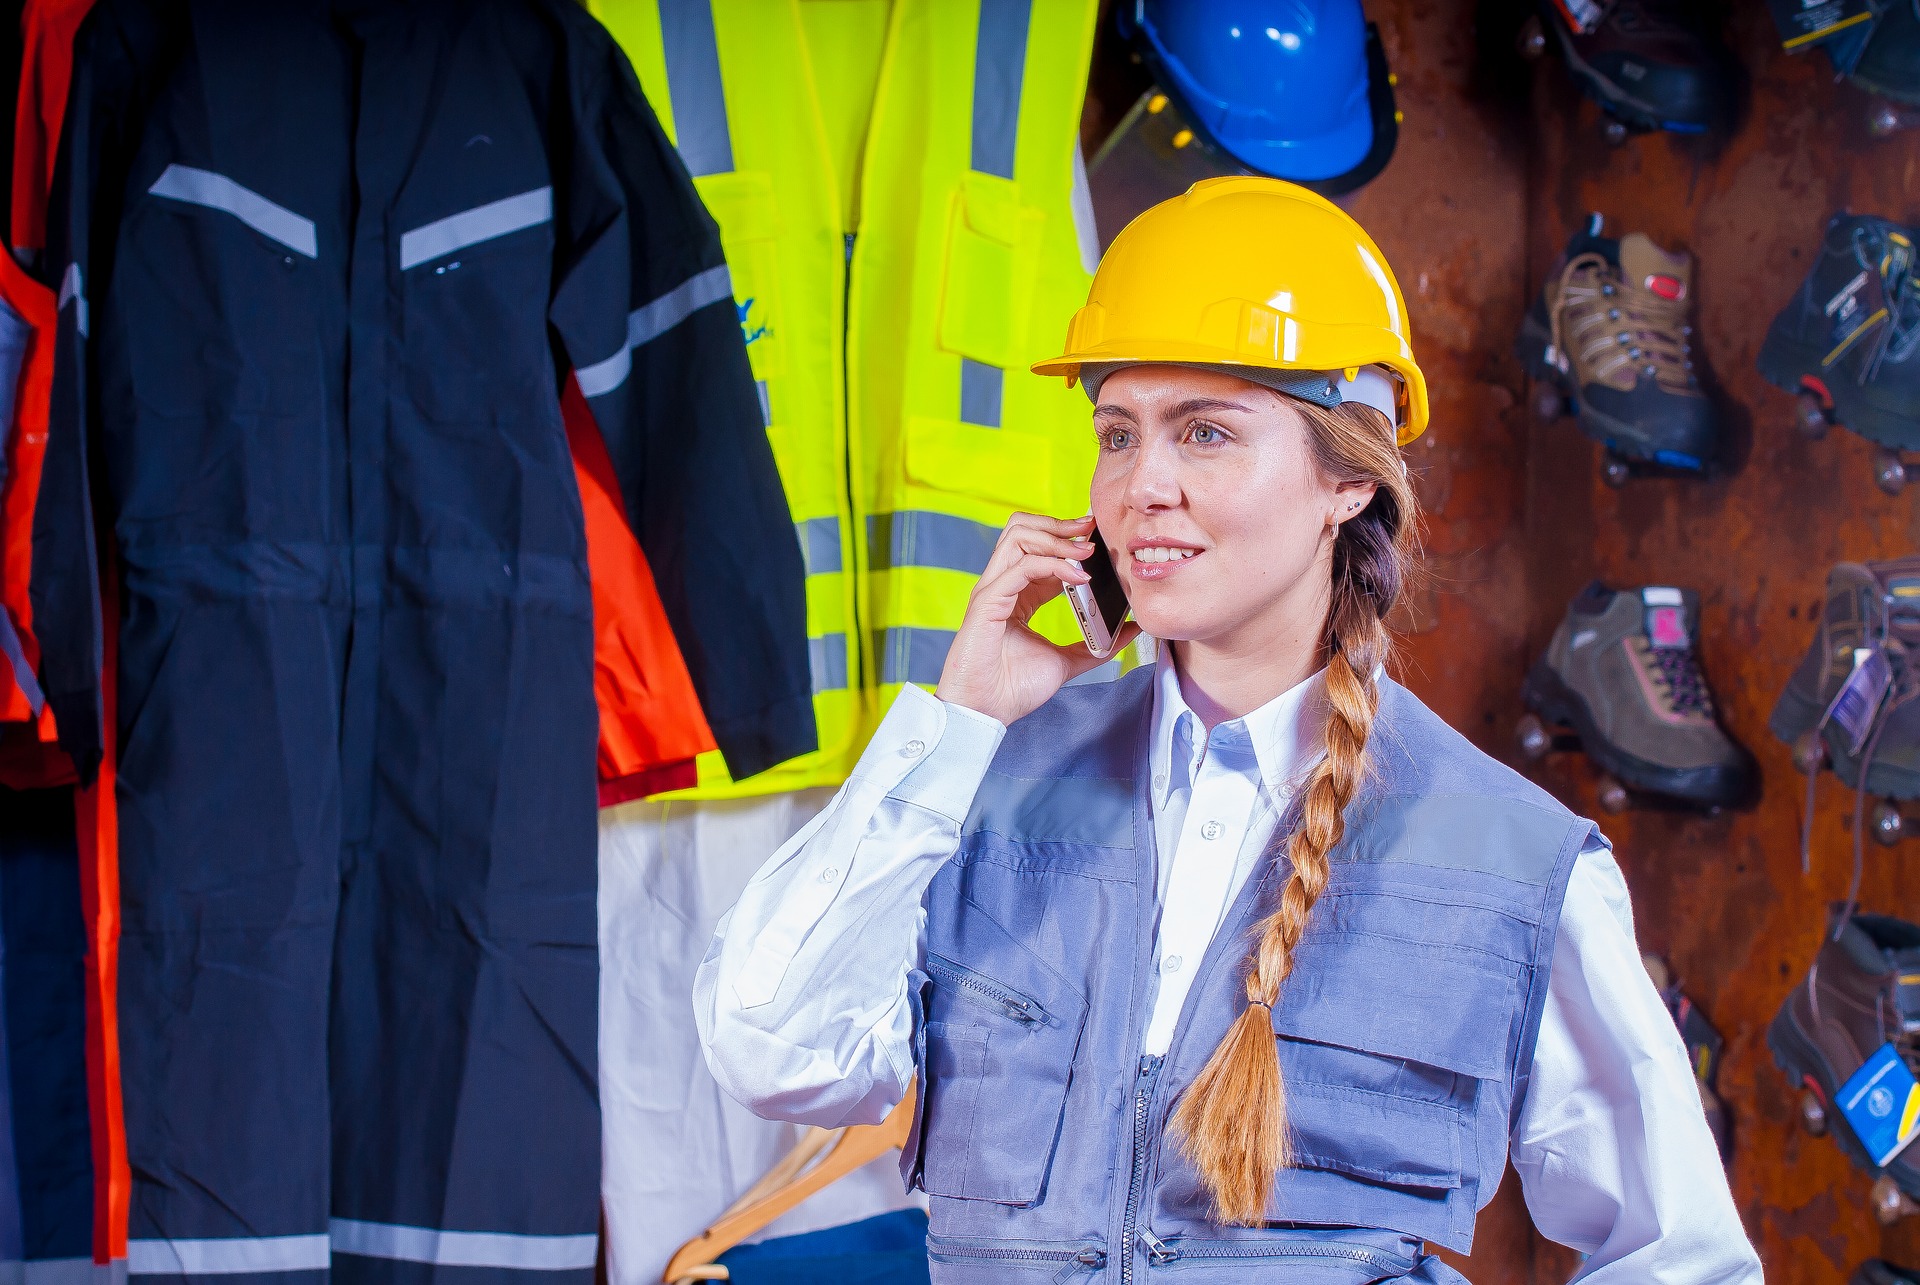 Mobile Apps Are Changing Workplace Safety